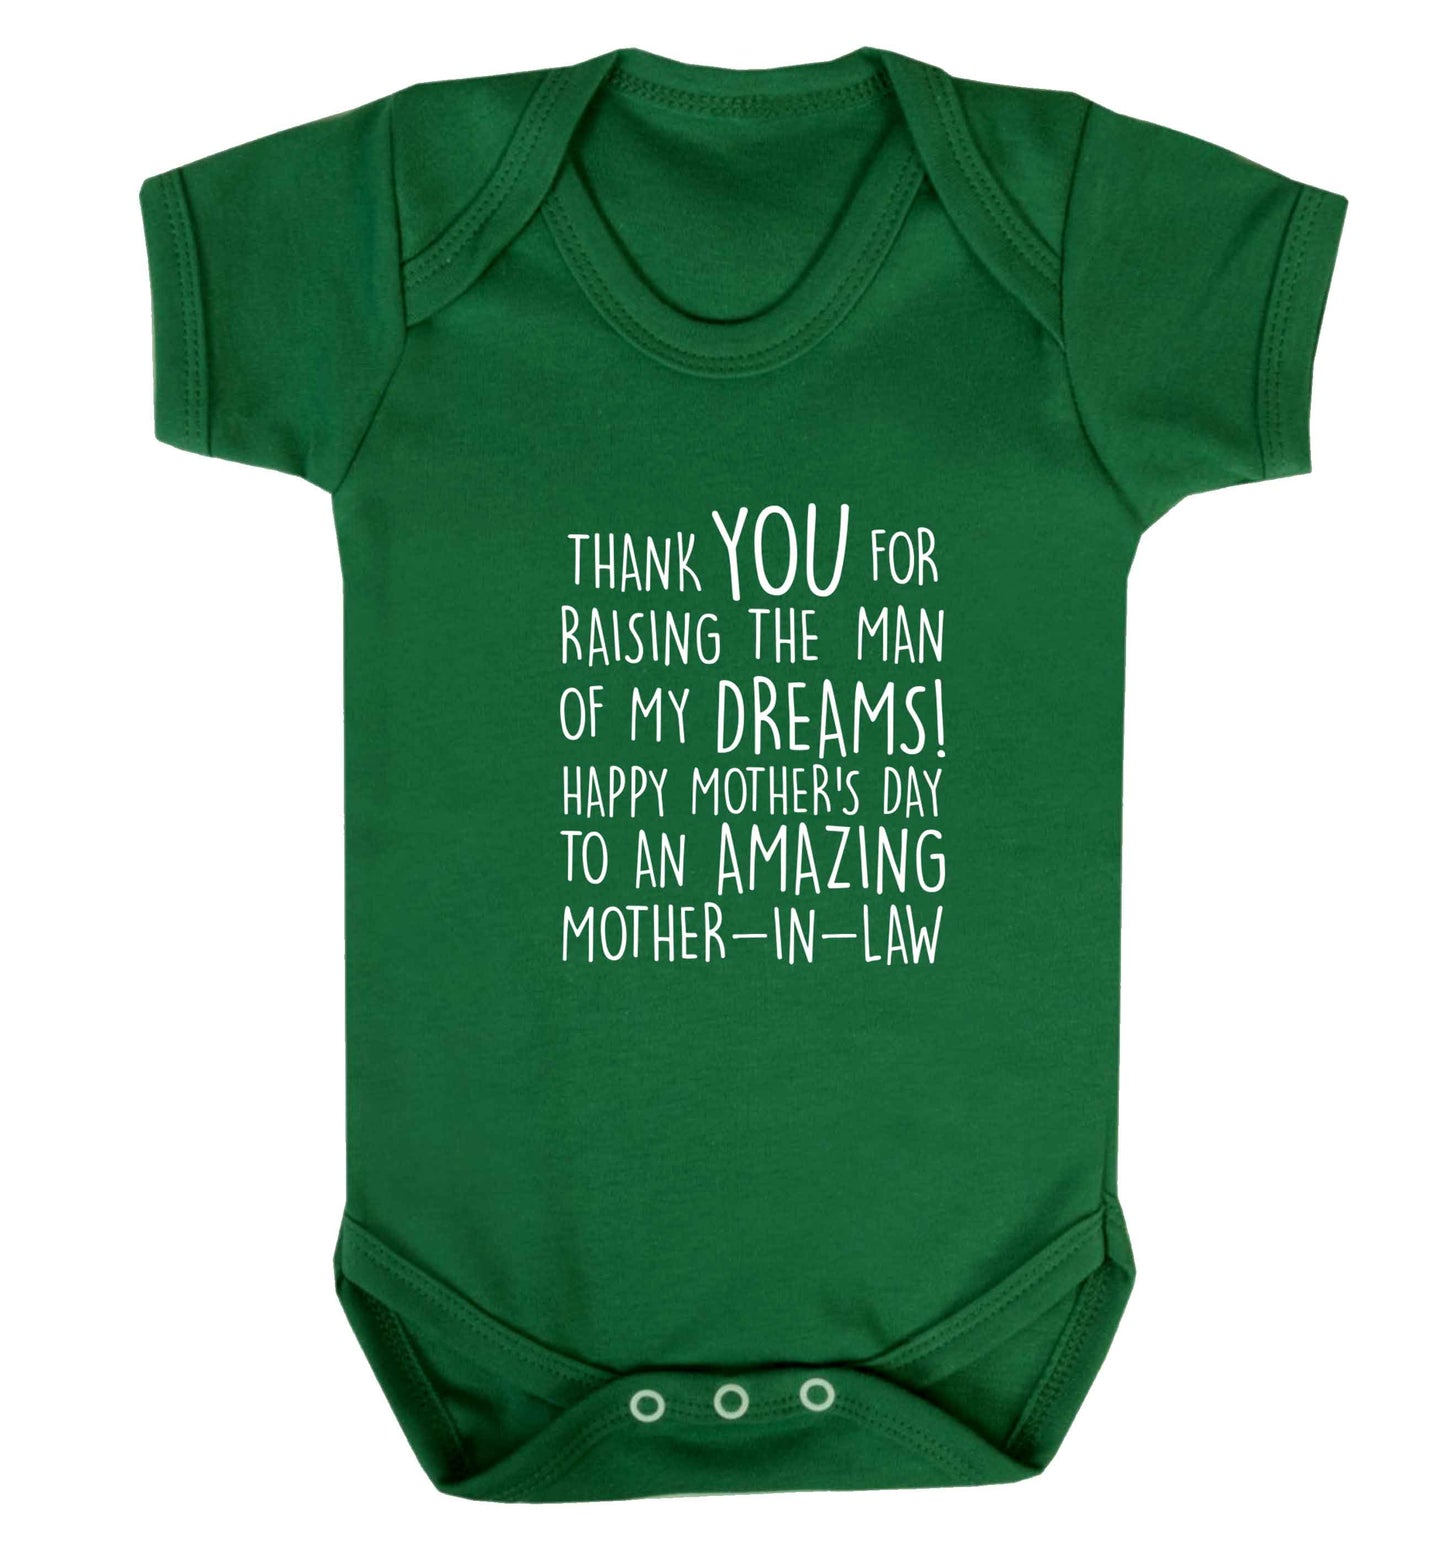 Raising the man of my dreams mother's day mother-in-law baby vest green 18-24 months